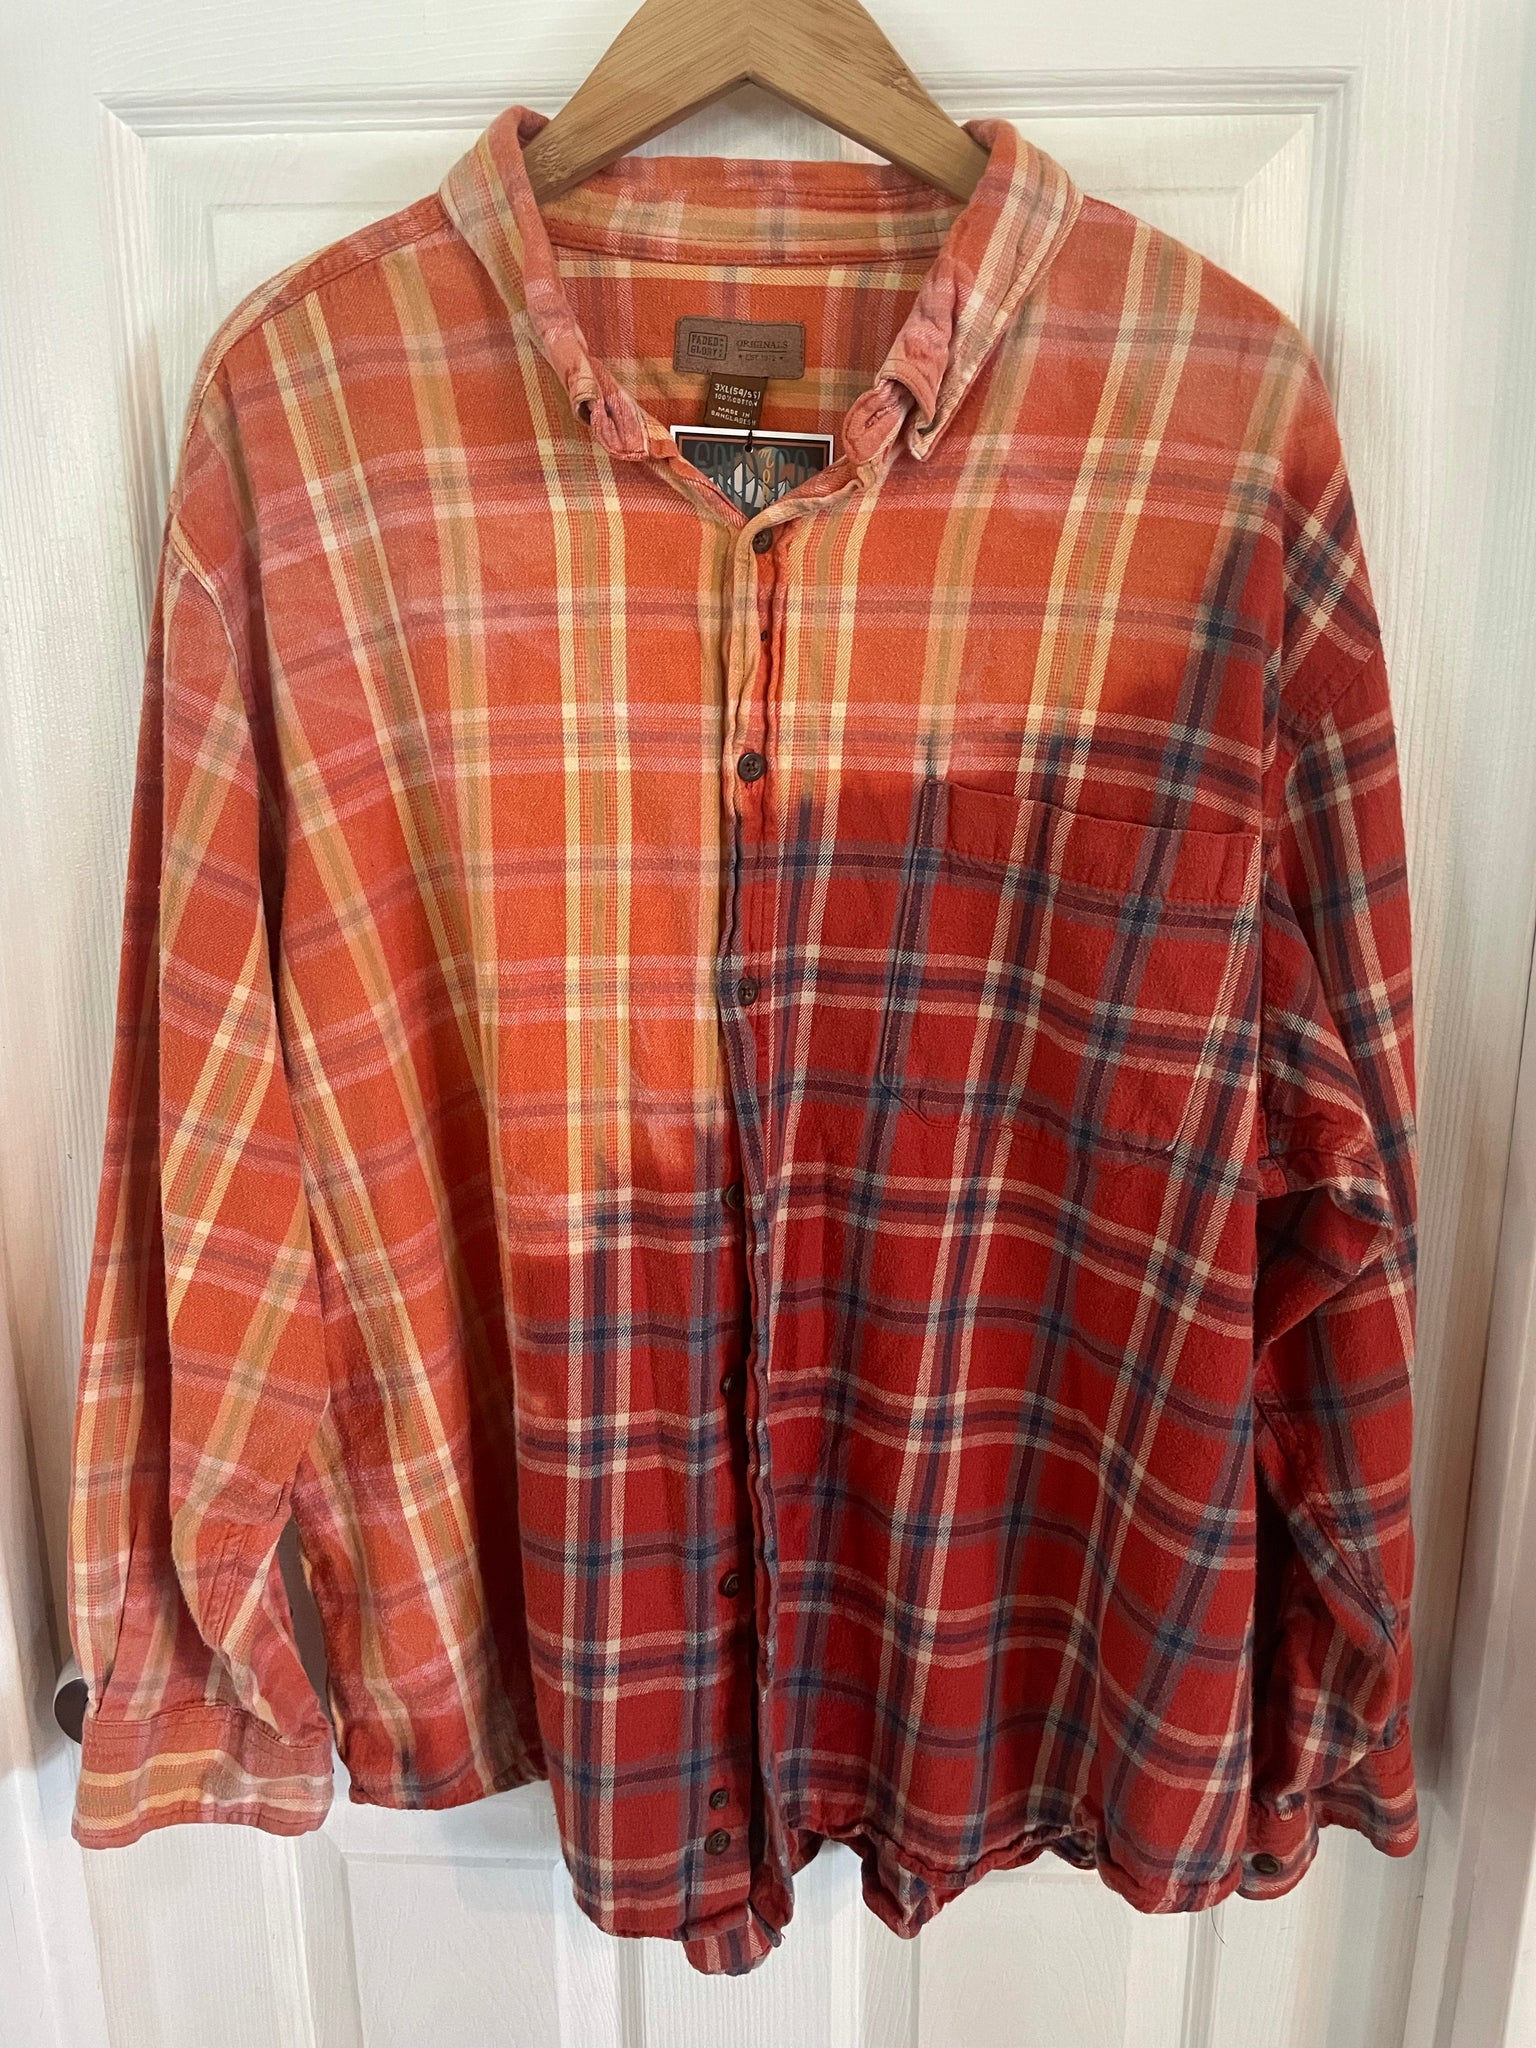 Cold Moon Collective Flannel - Orange/Red/Blue 3XL